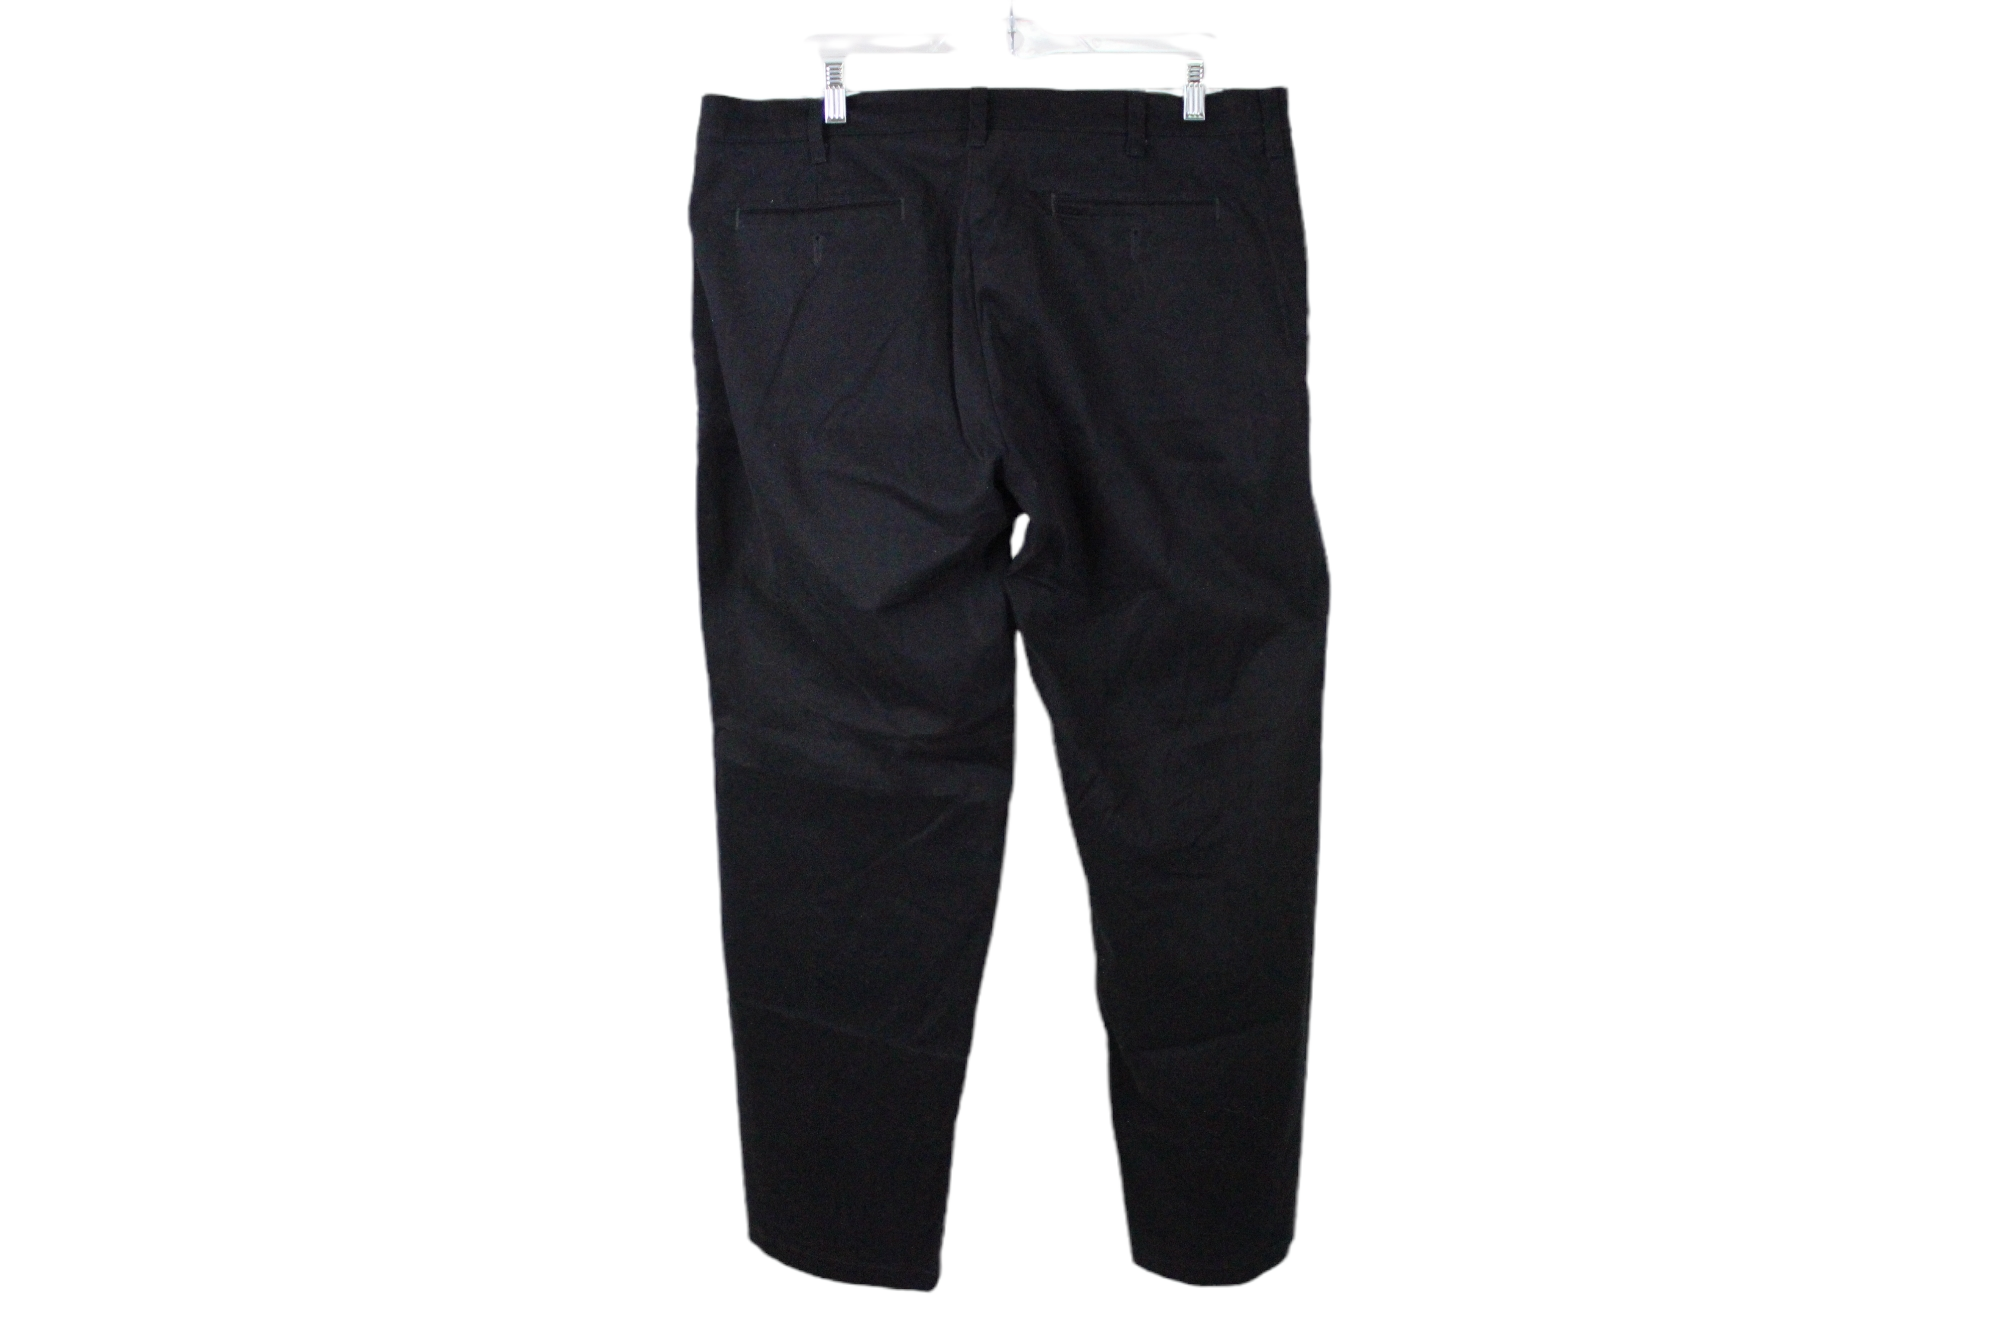 Lee Total Freedom Relaxed Fit Black Pant | 36X30